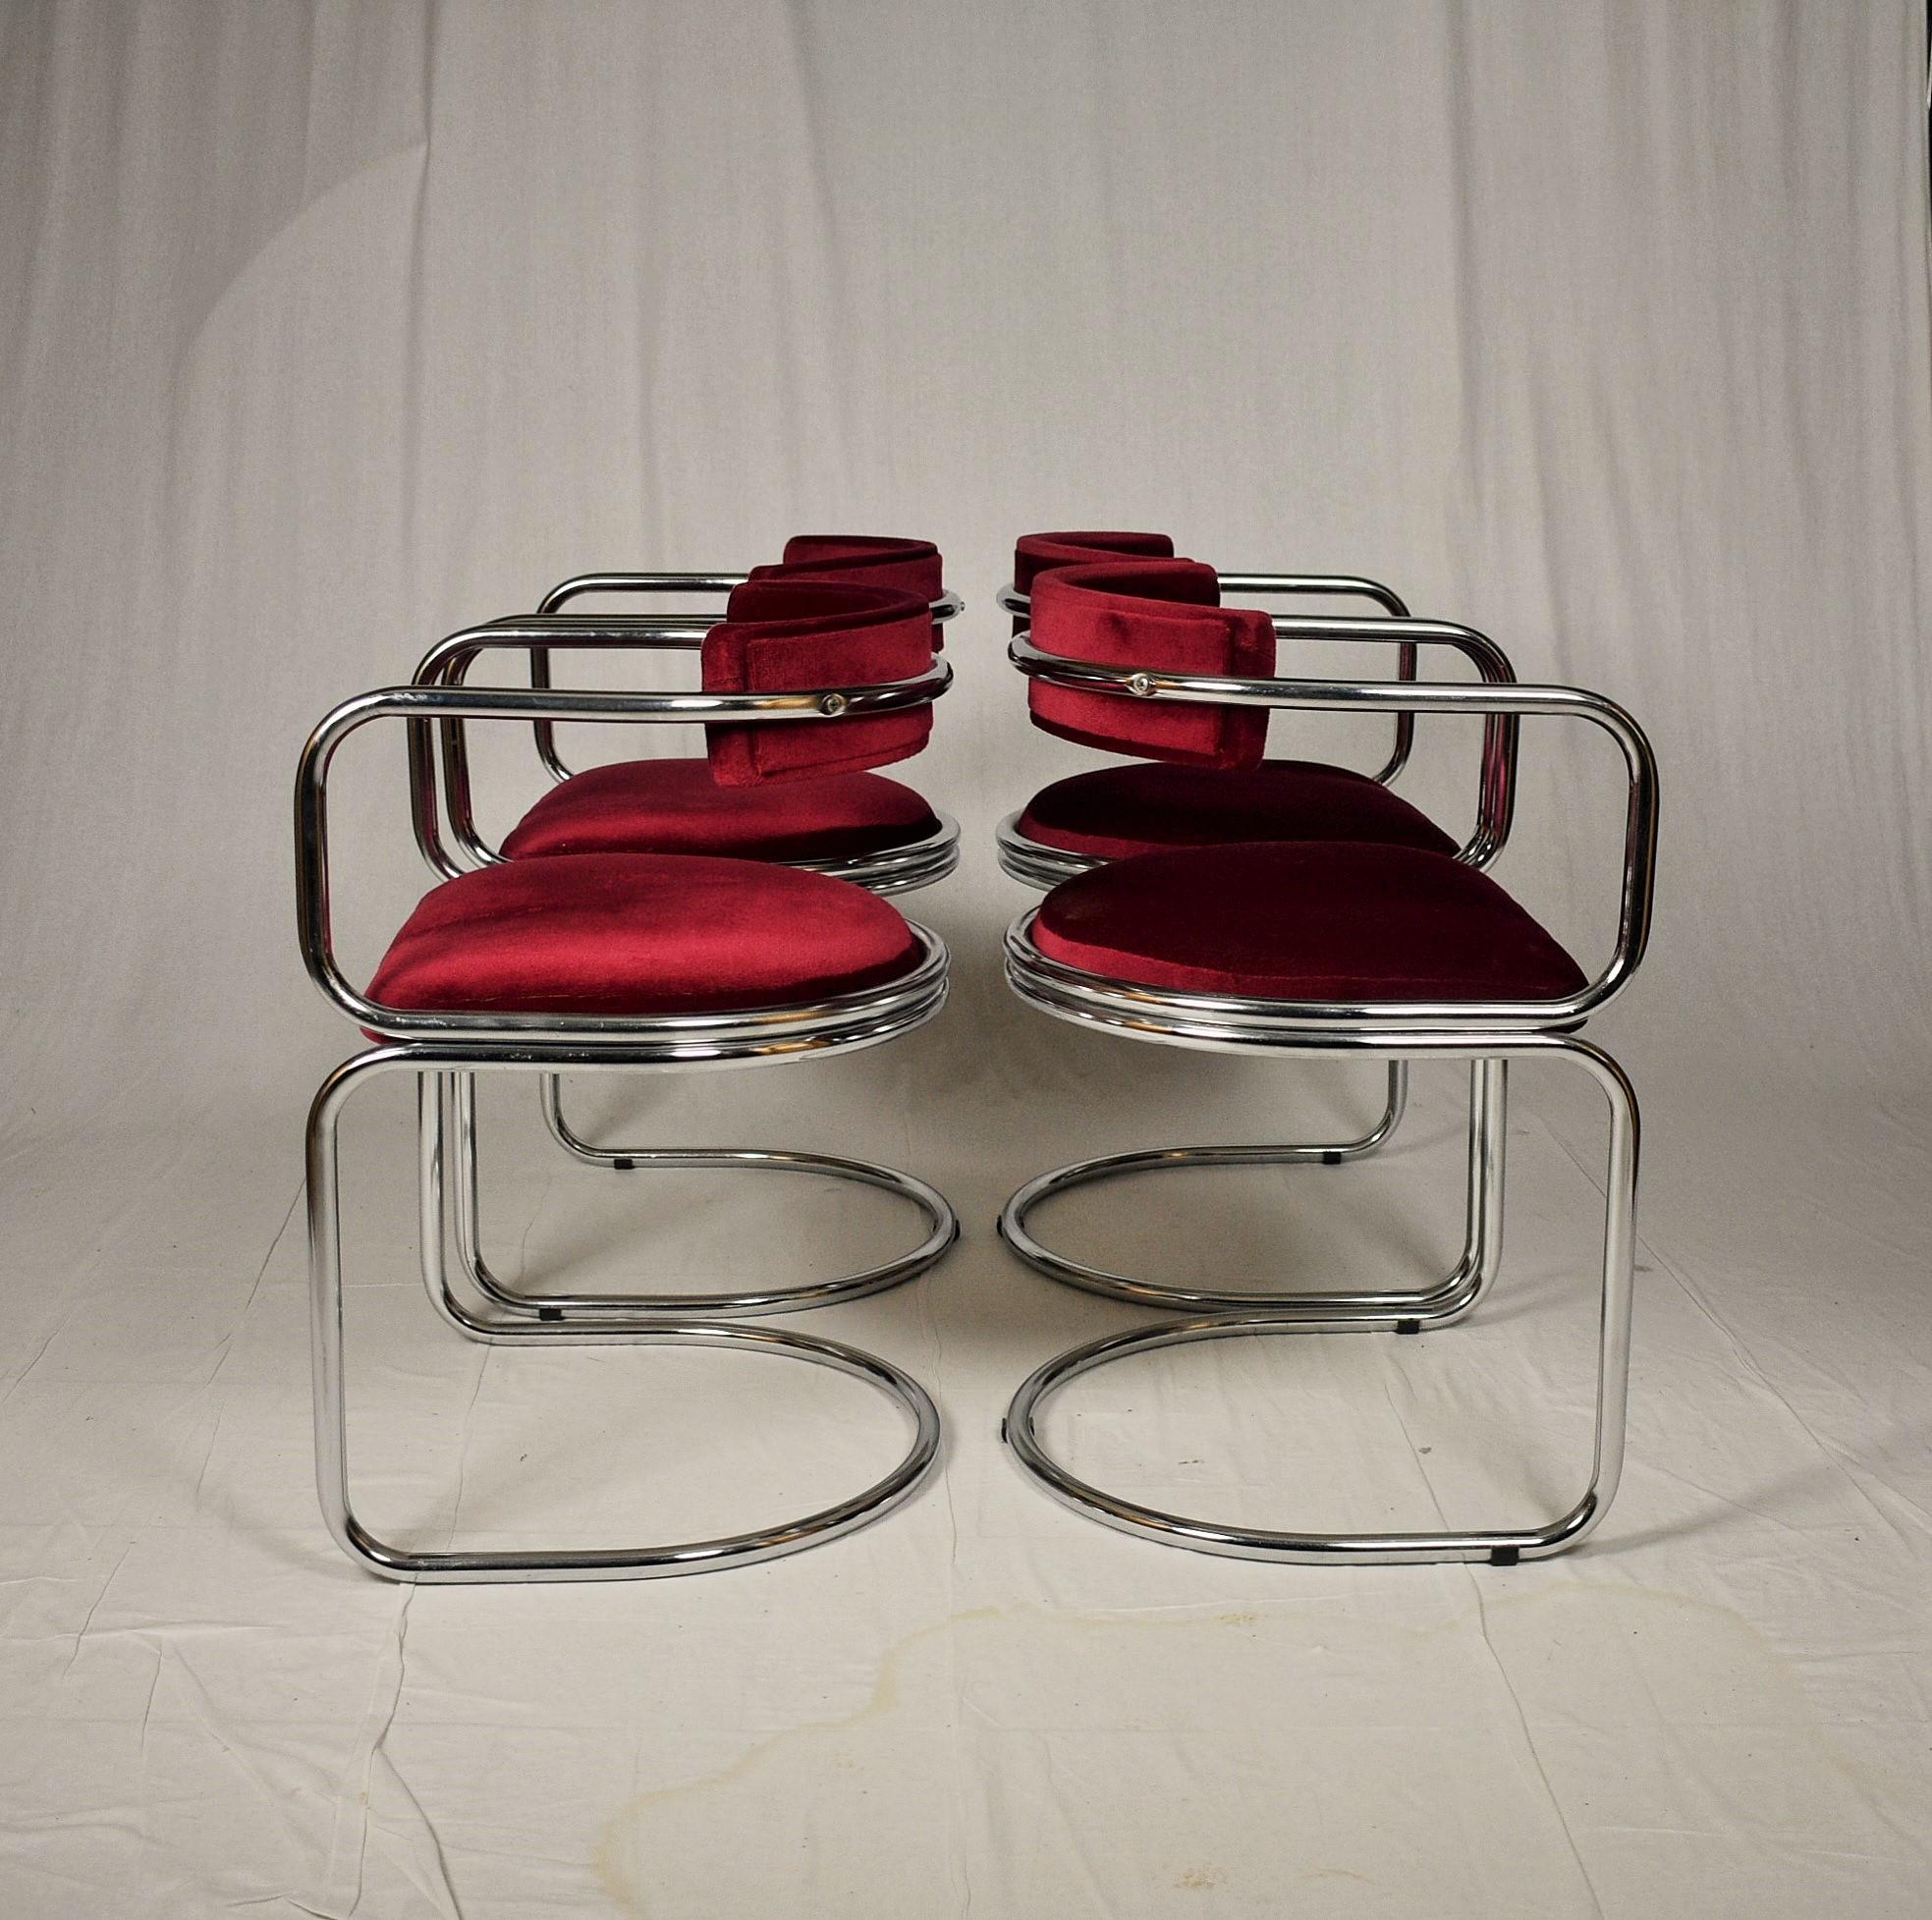 Zougoise Victoria chairs, good state, healthy sitting, cleaned. Authentic piece, 1970s, icon of Swiss design.
       